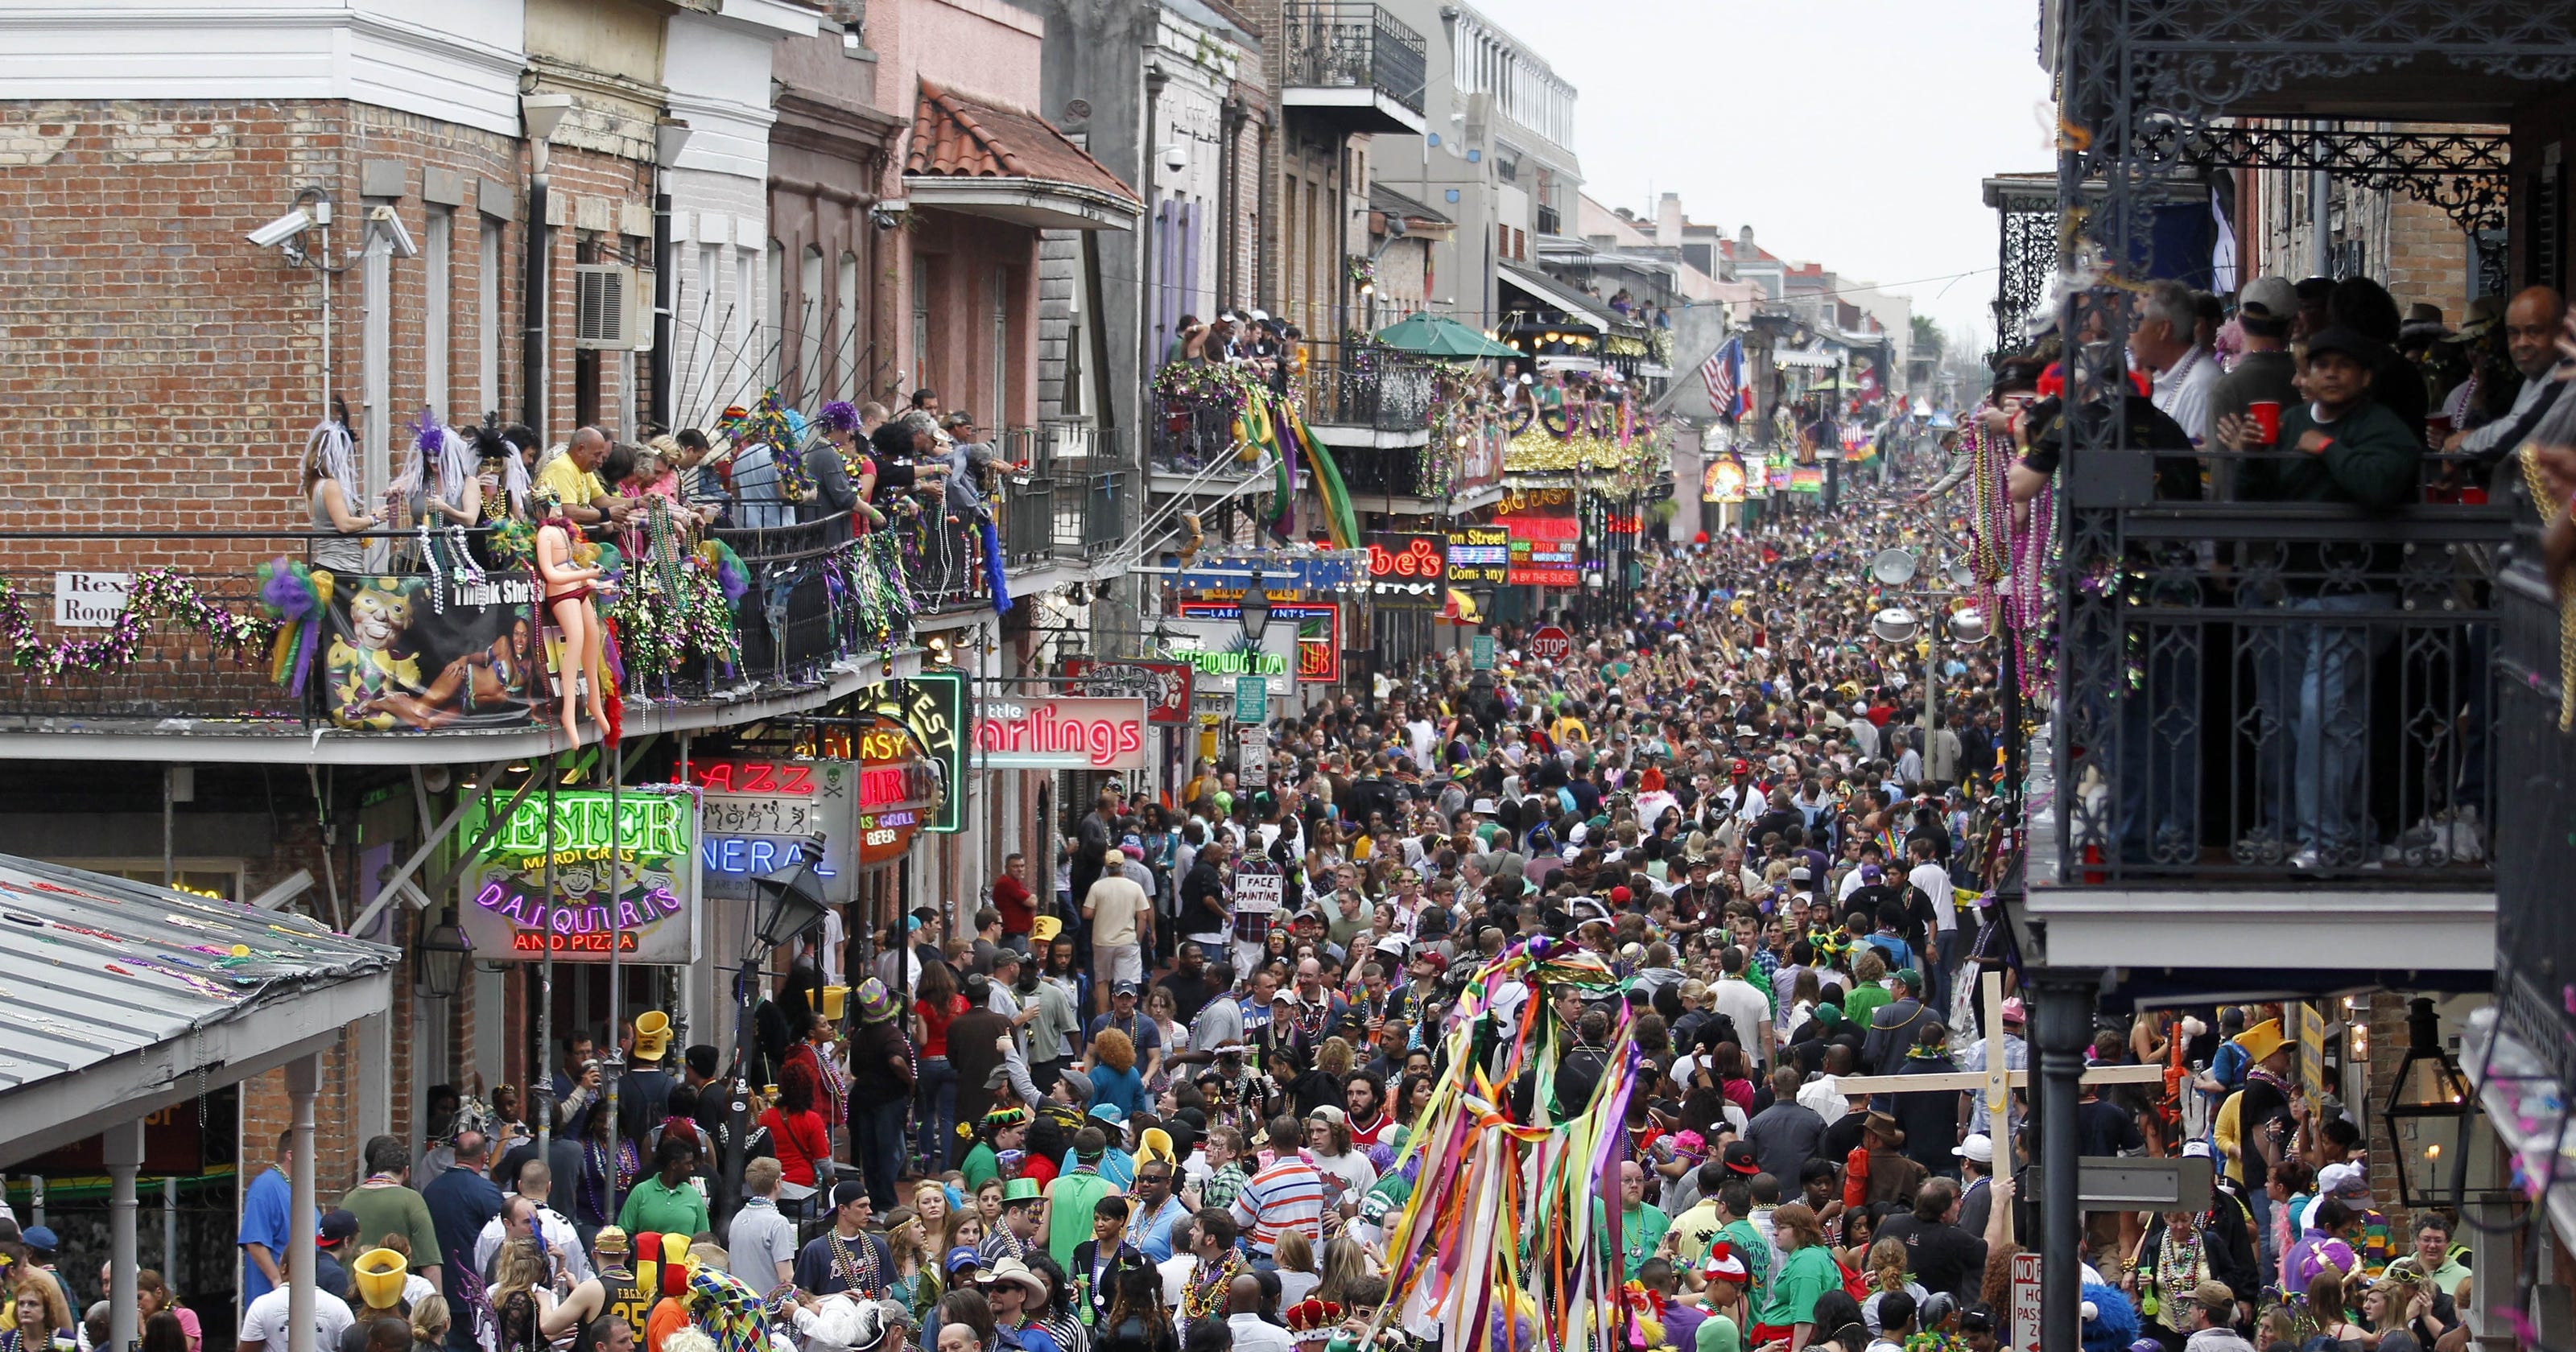 Party central: Mardi Gras, Super Bowl sweep New Orleans3200 x 1680